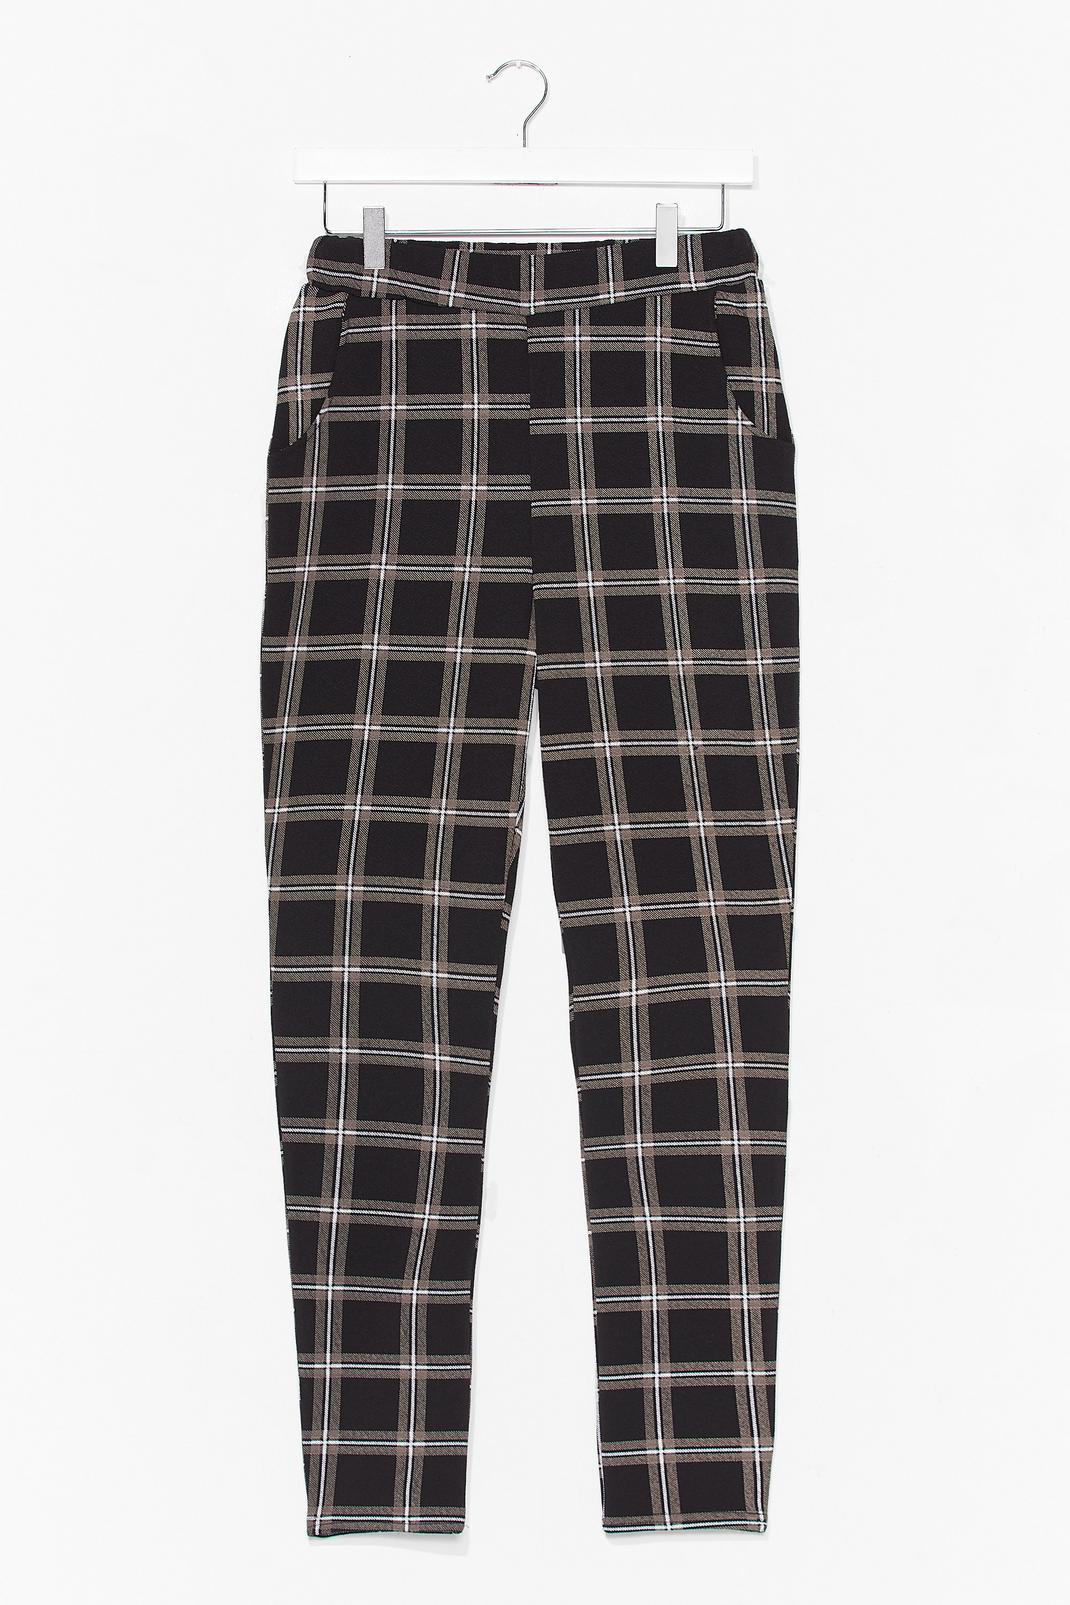 Square We Belong High-Waisted Check Pants image number 1